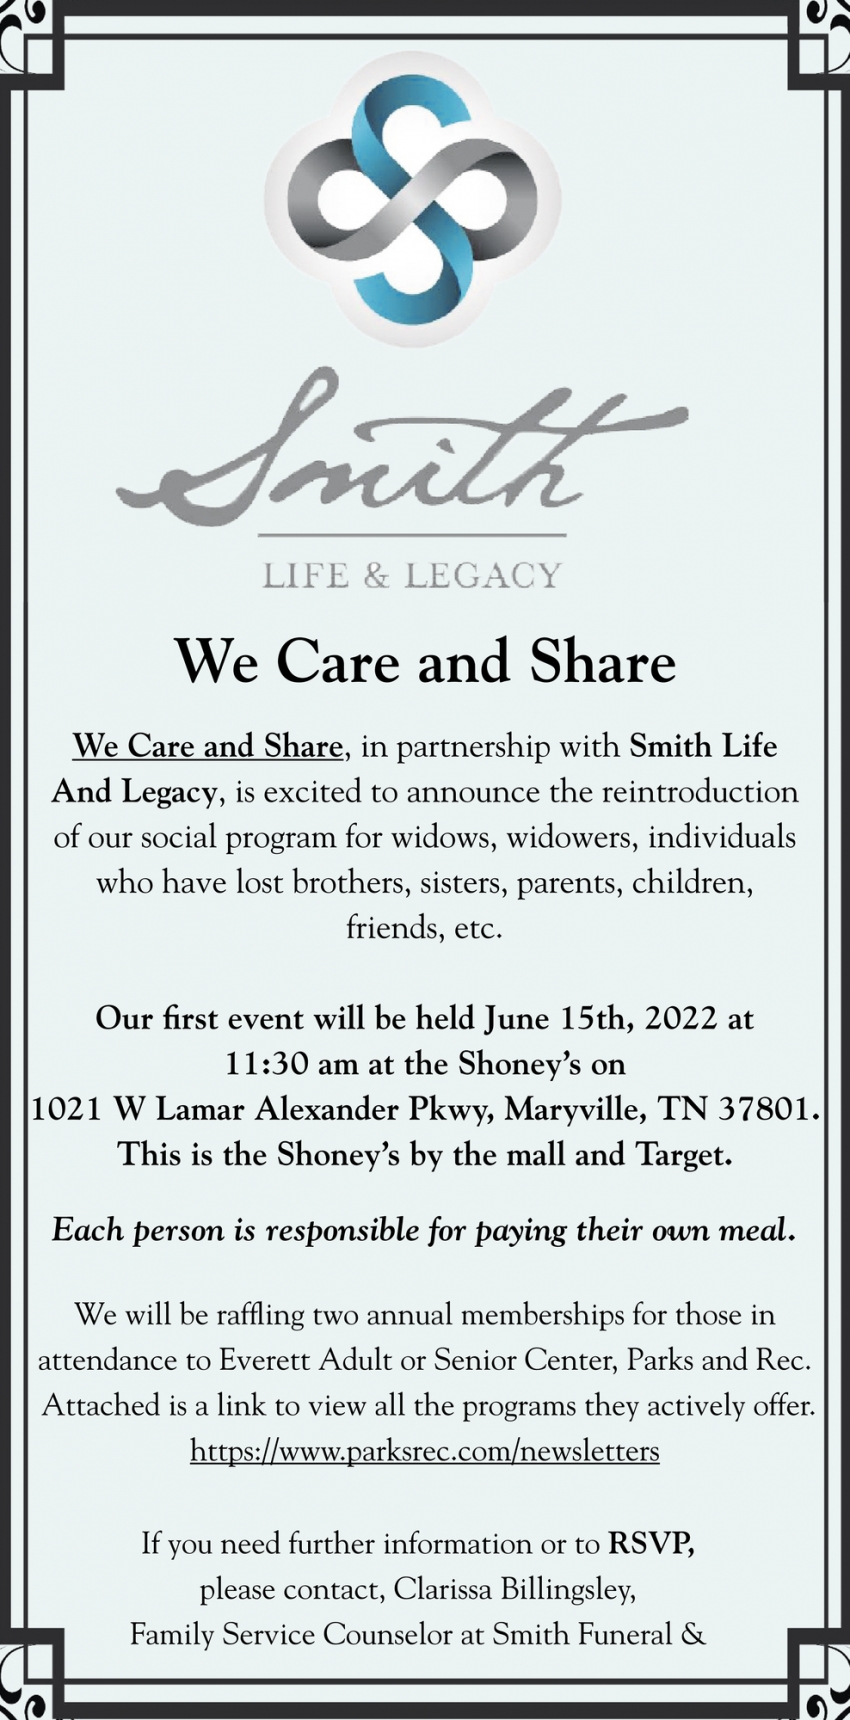 We Care and Share